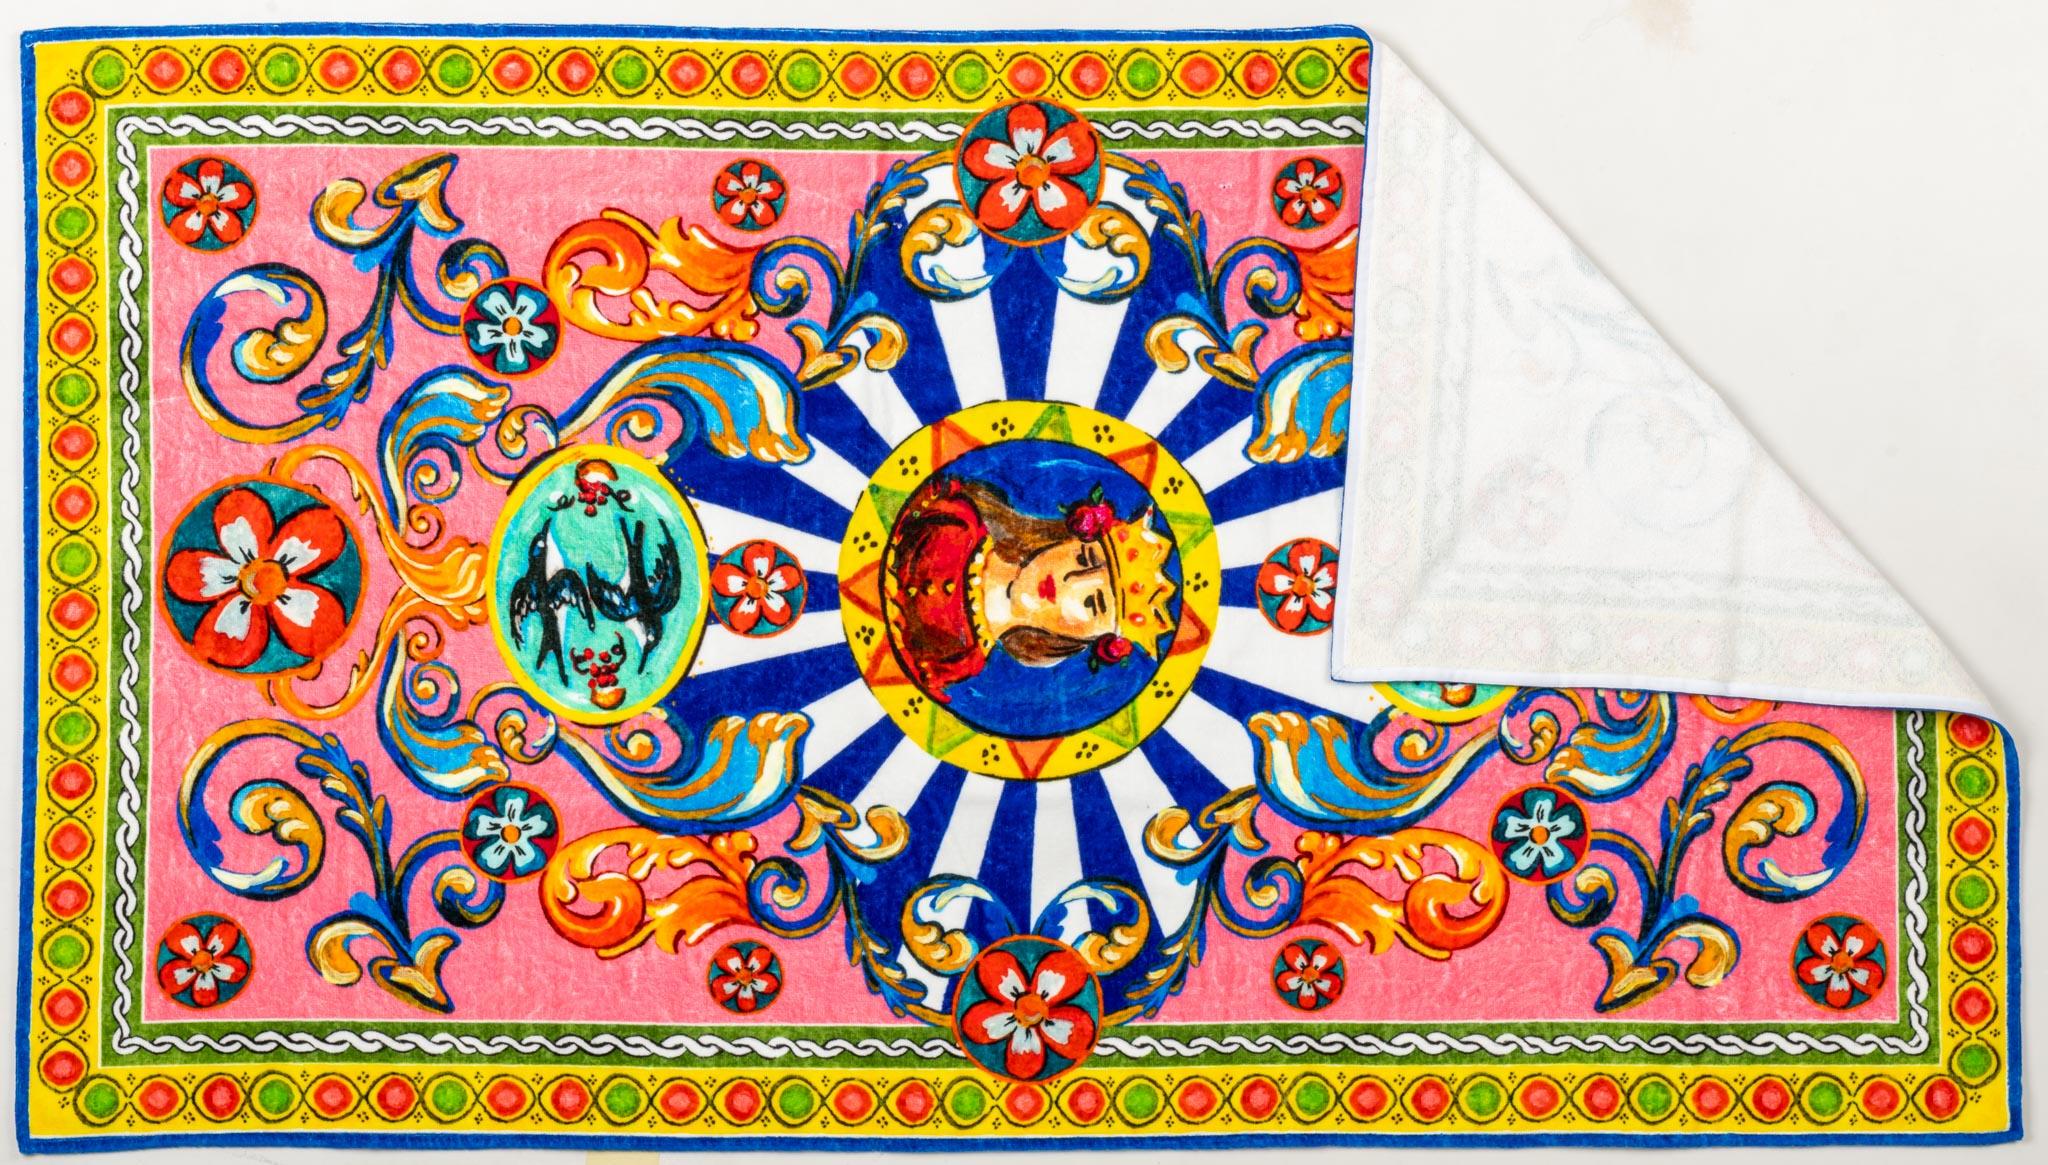 Dolce & Gabbana brand new terry cloth beach towel with sicilian design. Made in Italy .